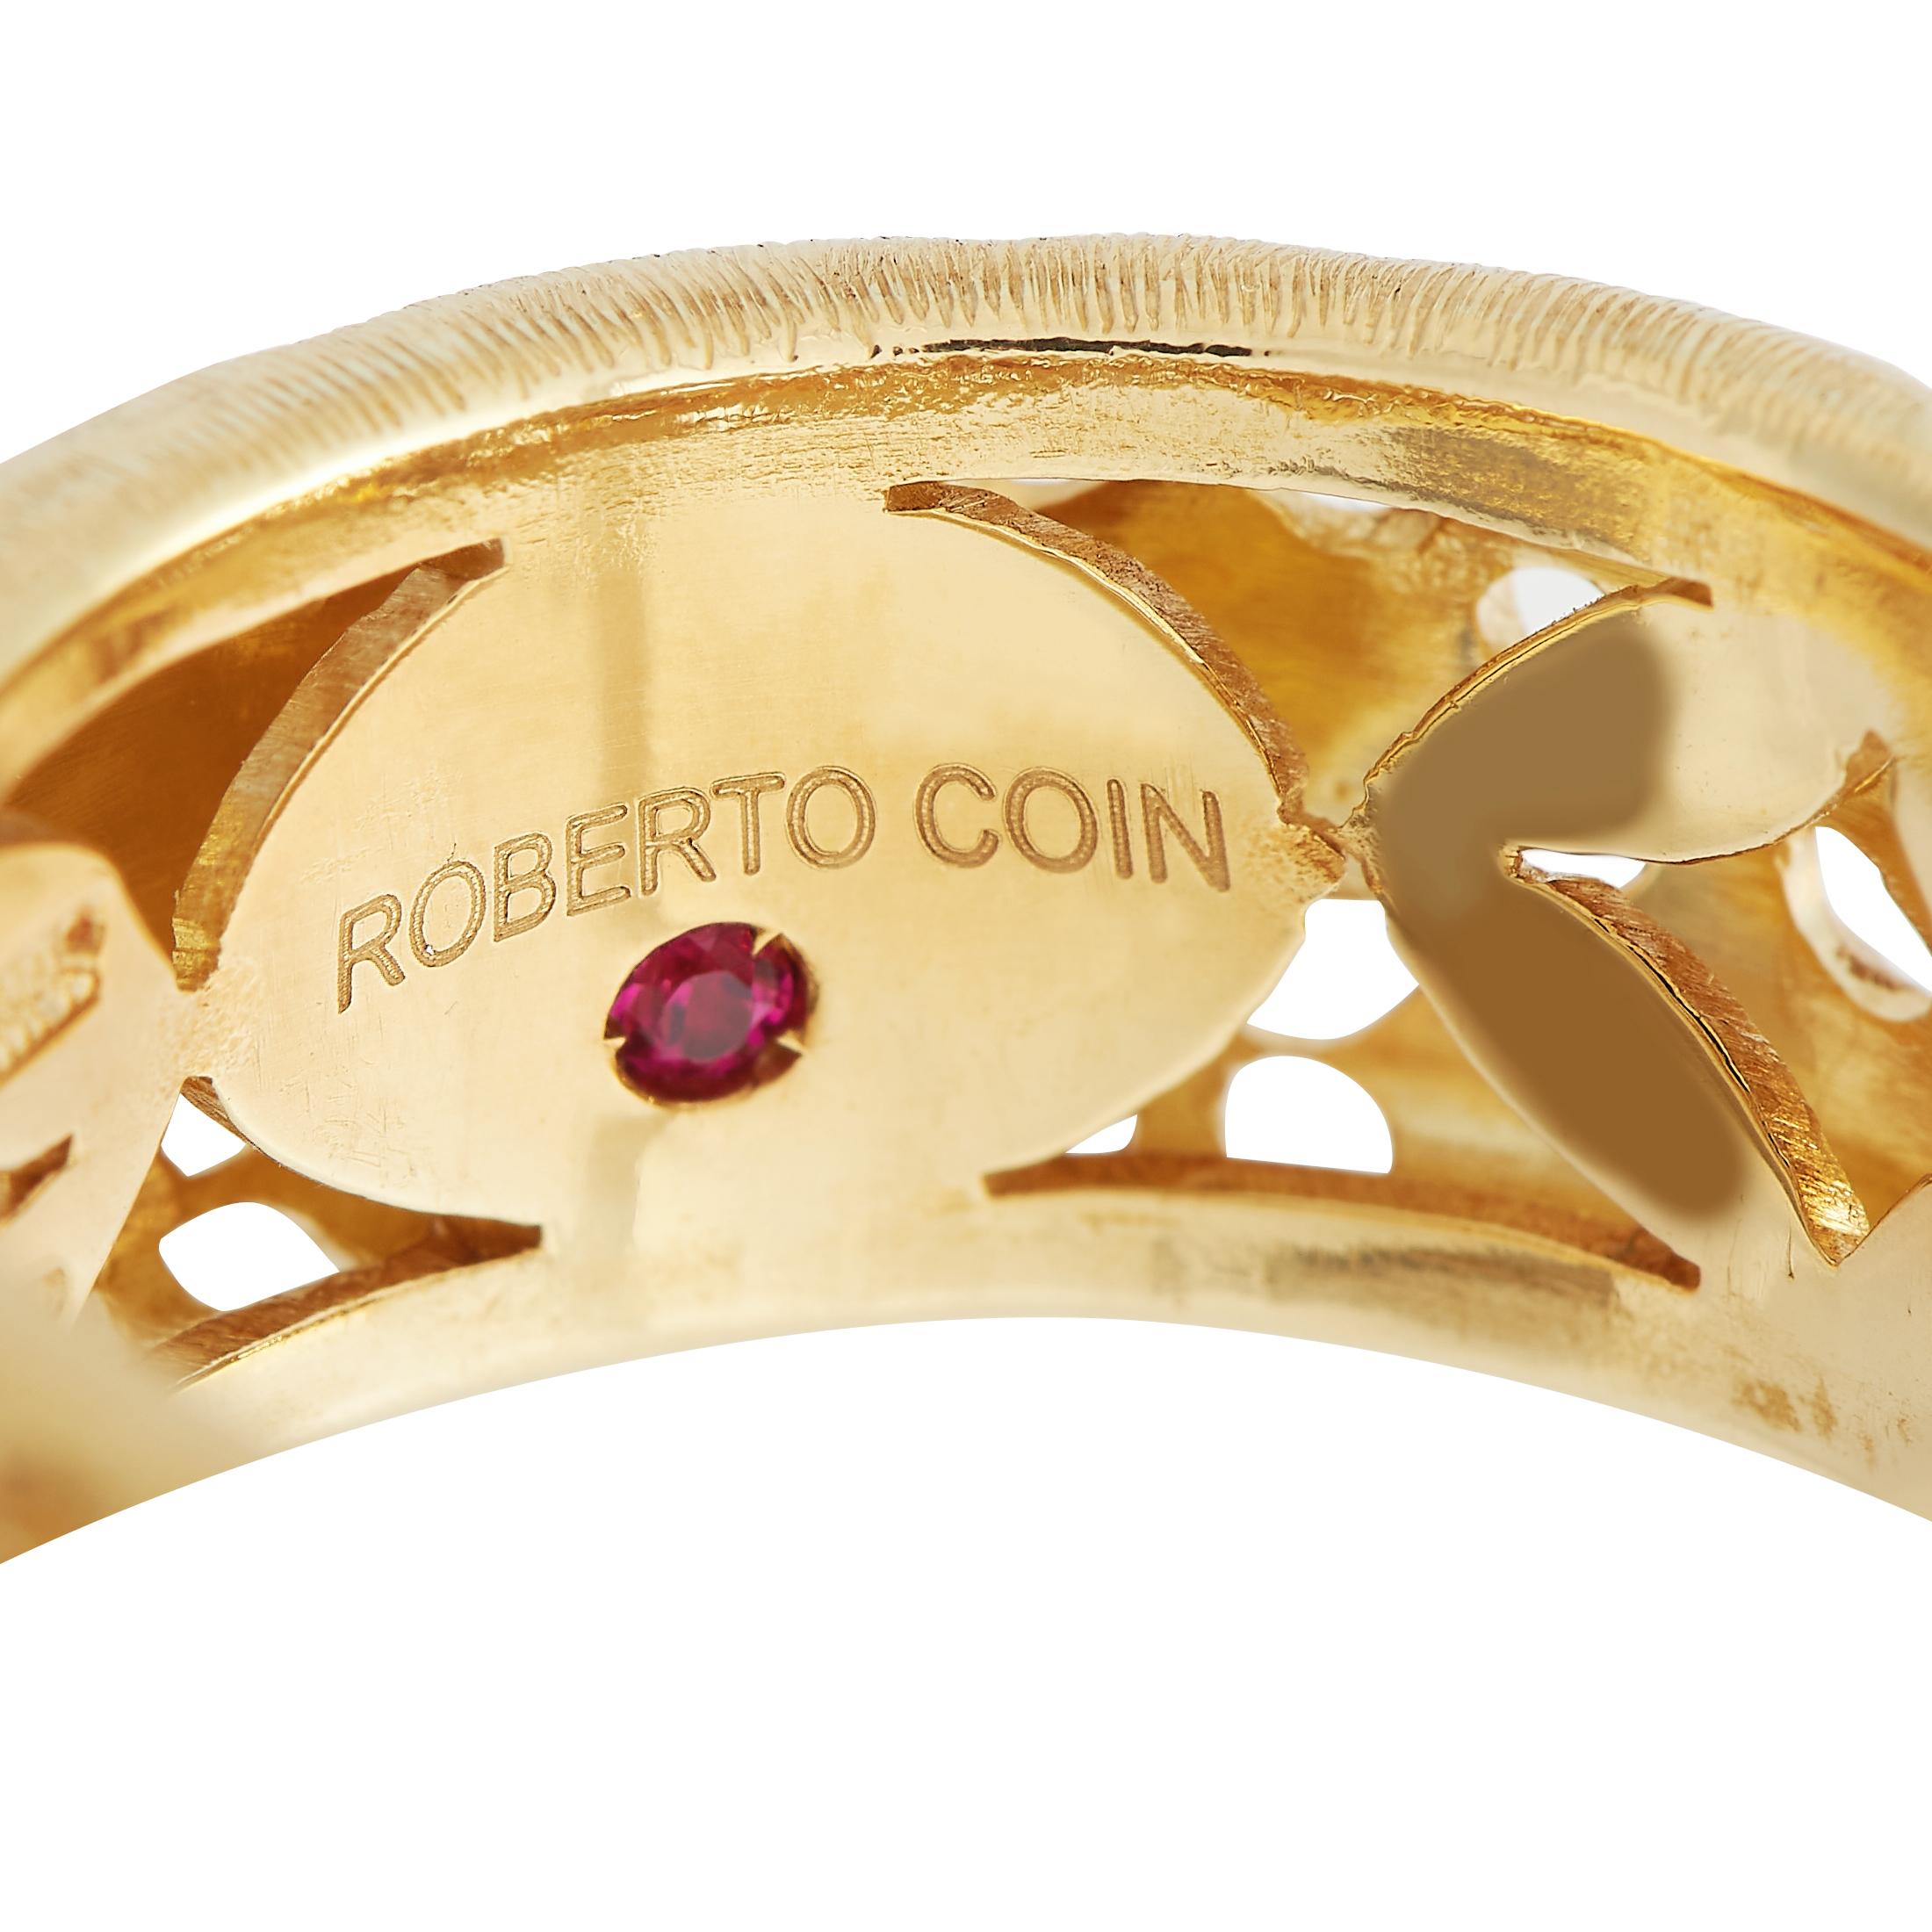 Roberto Coin 18K Yellow Gold 0.20ct Diamond Granada Ring RC11-021424 In Excellent Condition For Sale In Southampton, PA